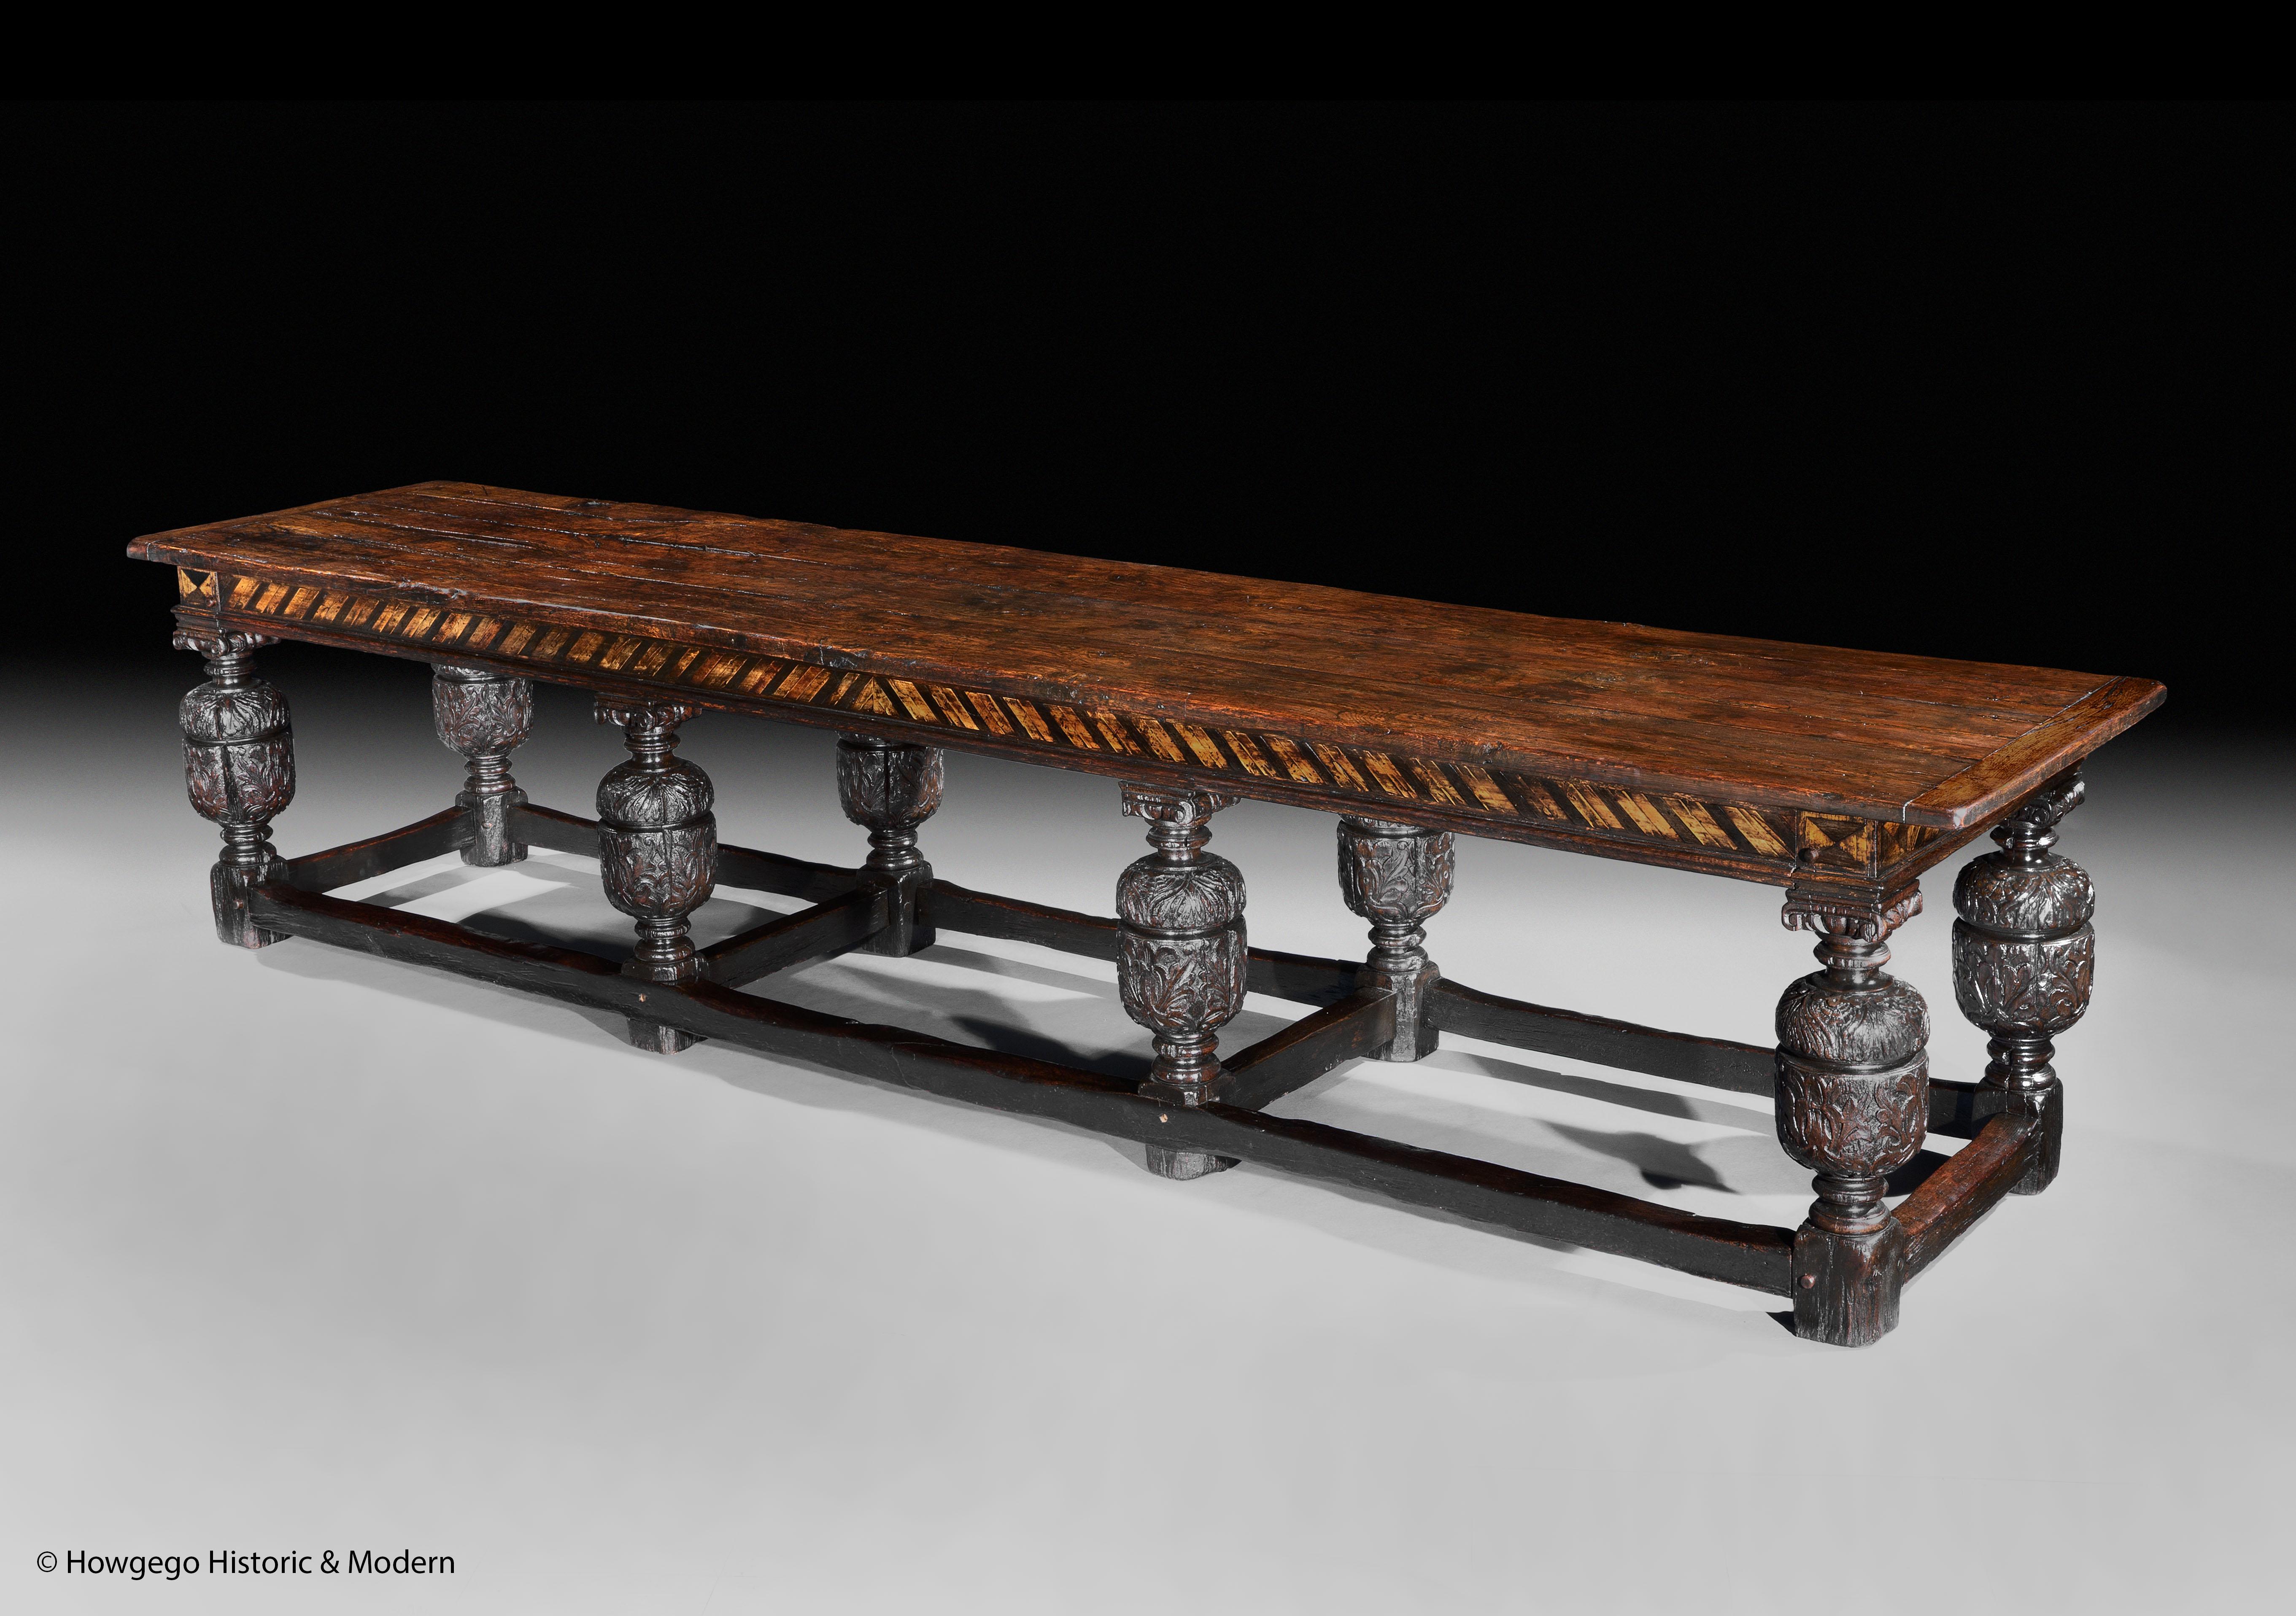 A MASSIVE, 18 SEATER, LATE-19TH CENTURY, ANTIQUARIAN, REFECTORY TABLE, with an elm top, boxwood and parquetry frieze and oak base 3.68m 145